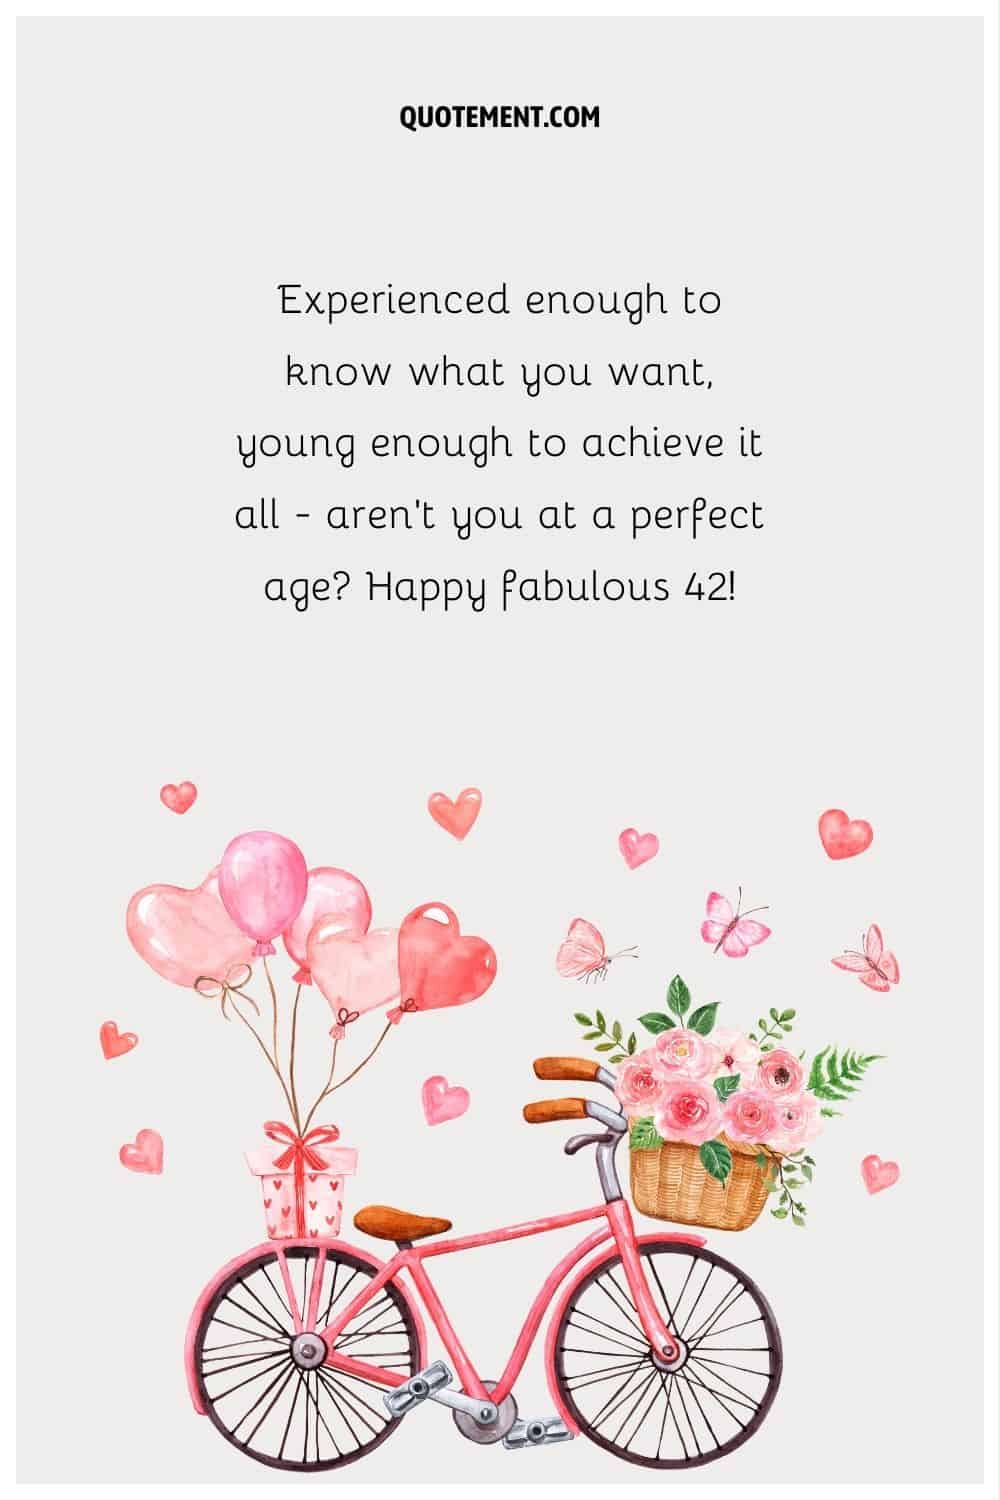 “Experienced enough to know what you want, young enough to achieve it all - aren't you at a perfect age Happy fabulous 42!”